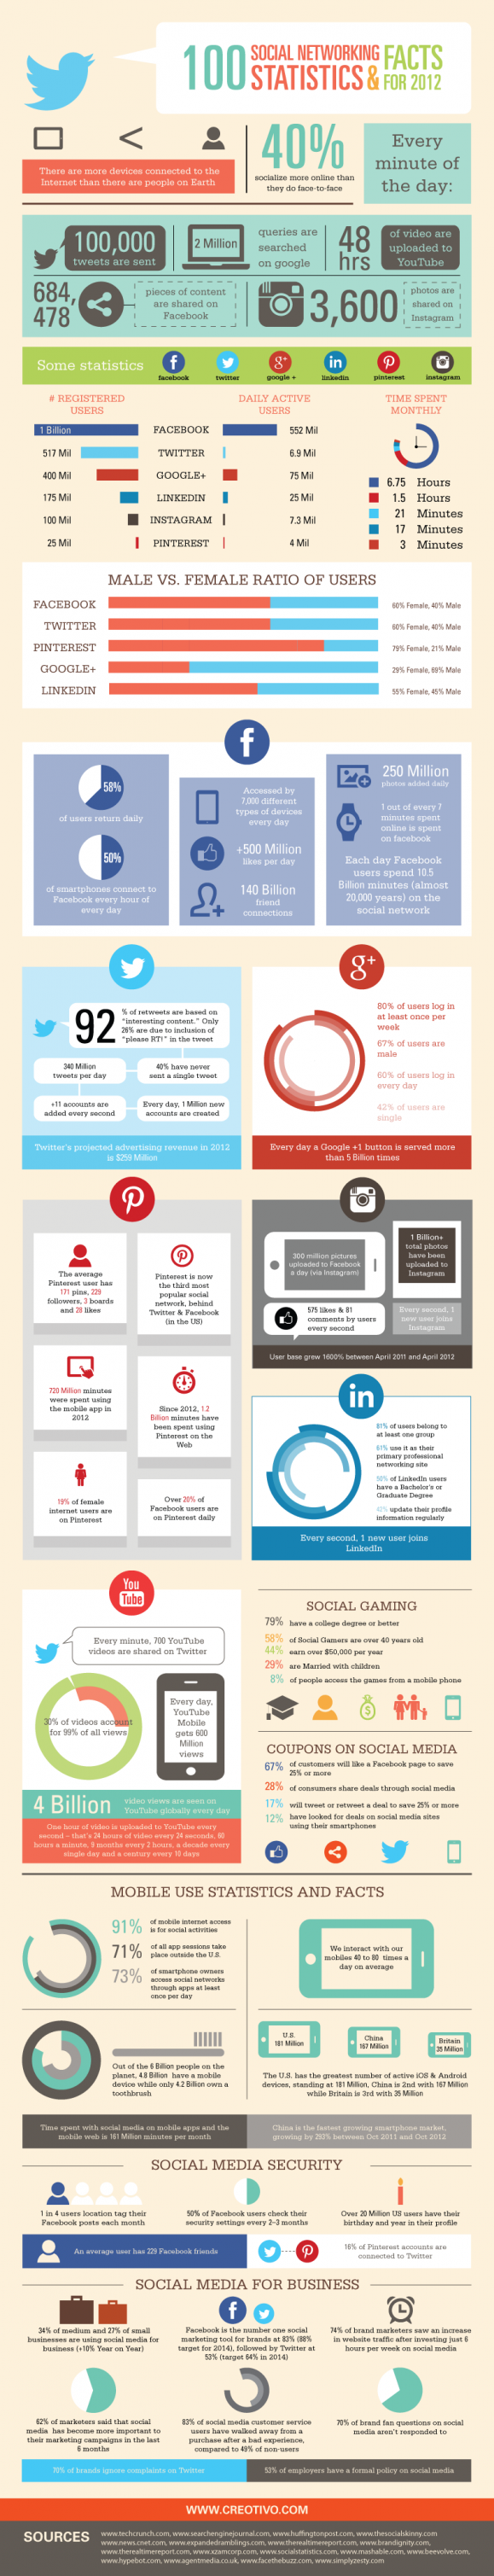 100 Social Networking Statistics & Facts for 2012